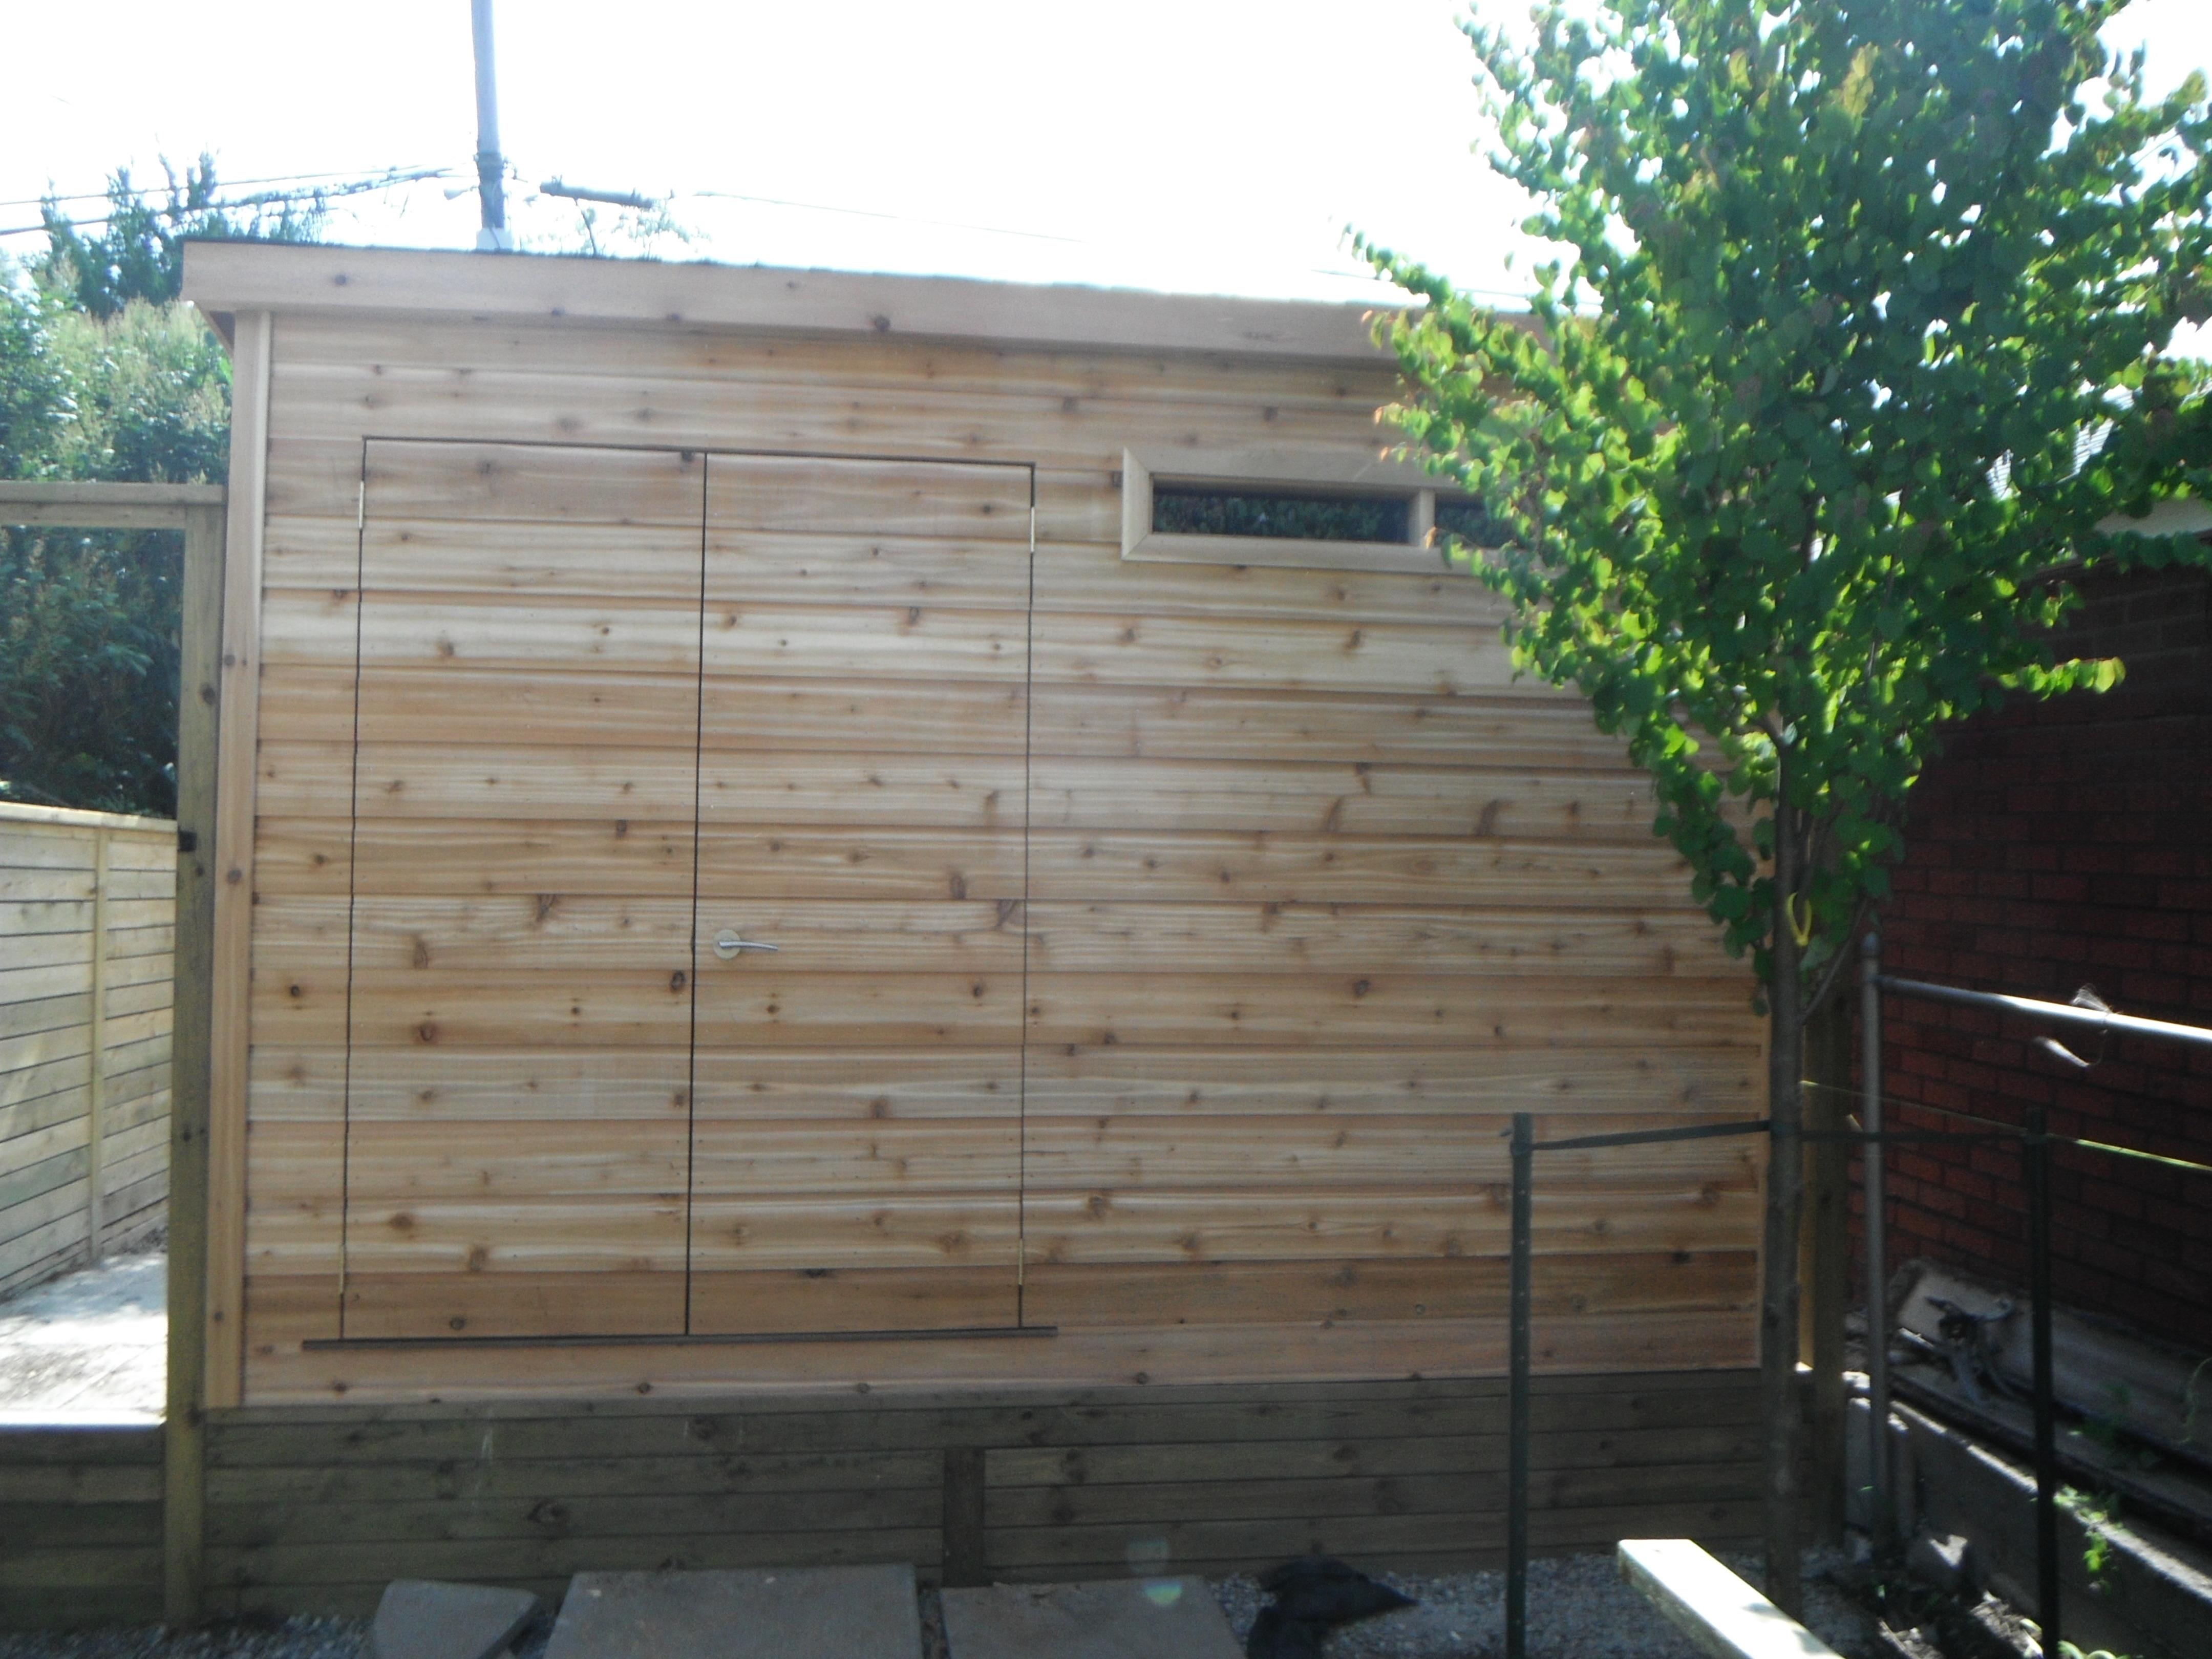 Cedar Sarawak shed 4x12 with concealed double doors in Toronto, Ontario. ID number 133451-2